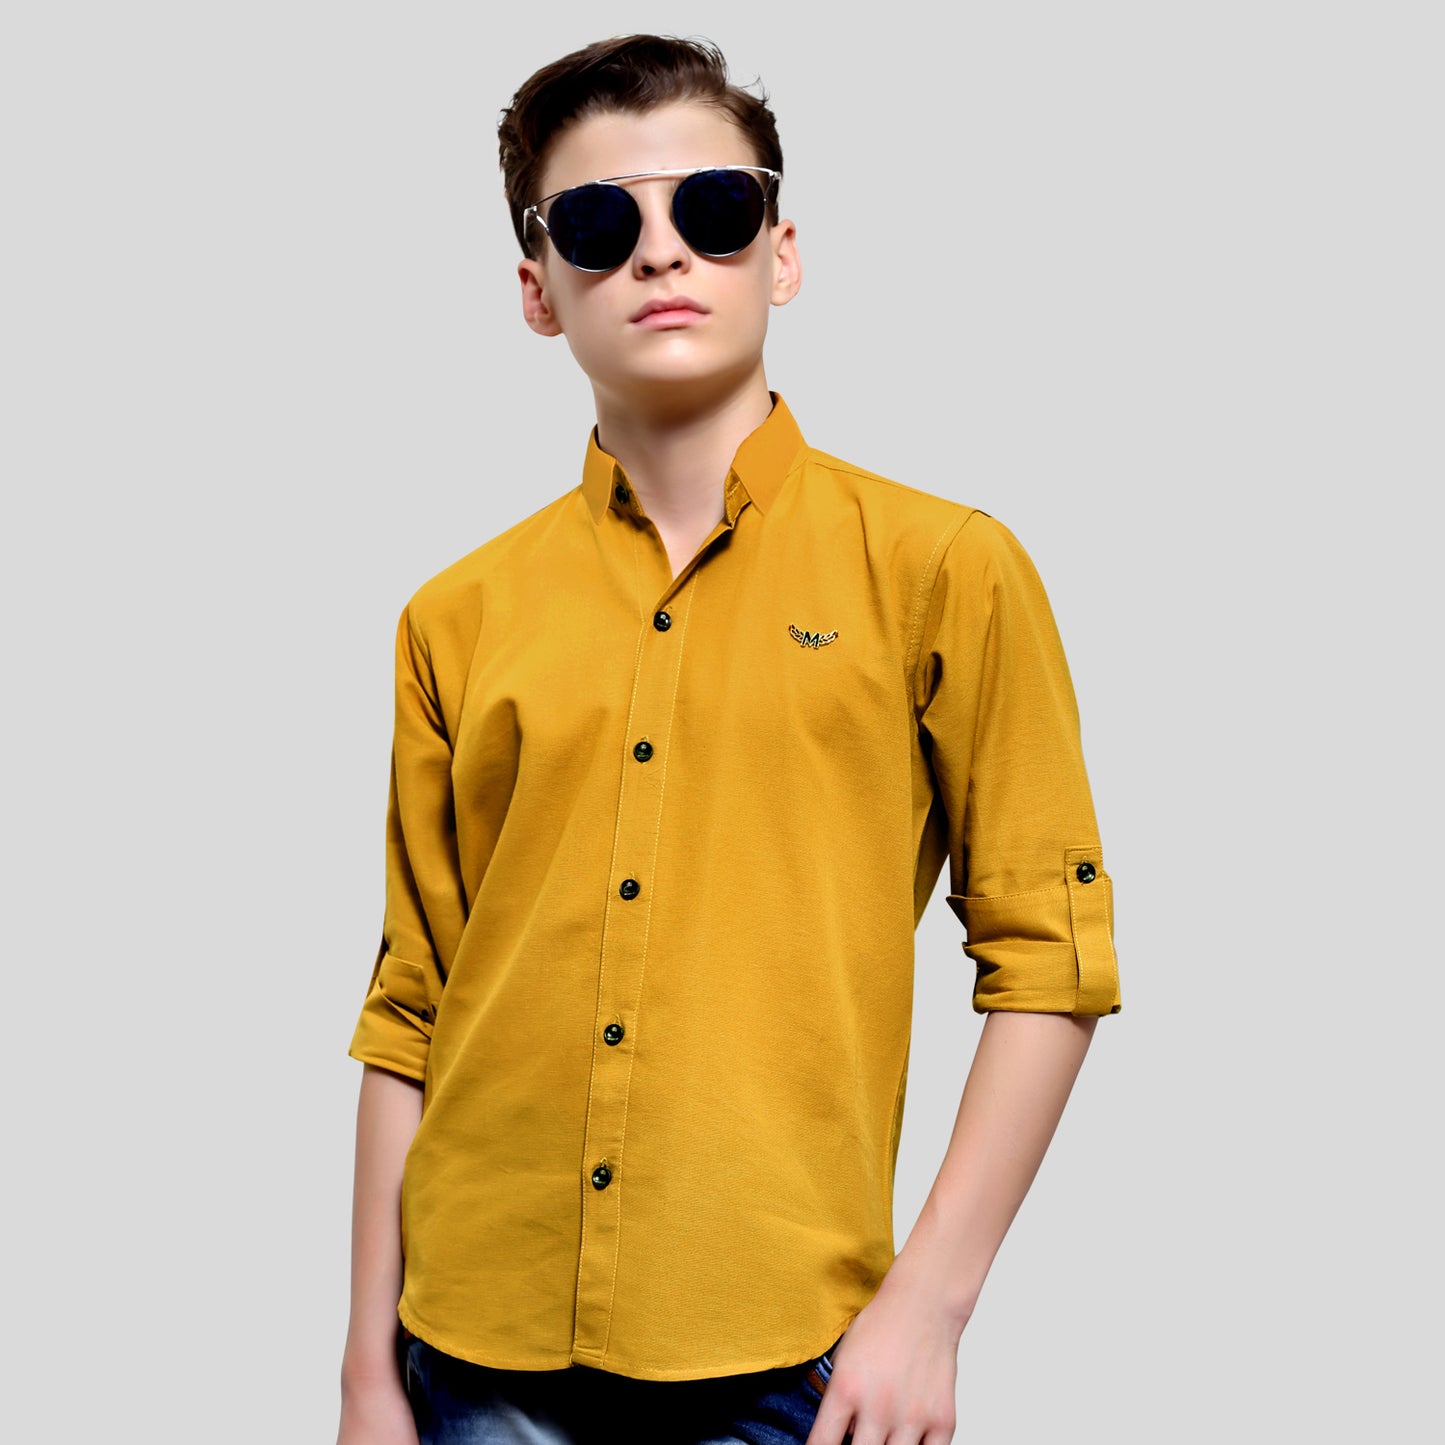 Swagger in Style: Boys' Classic Collar Shirt for Cool Comfort!